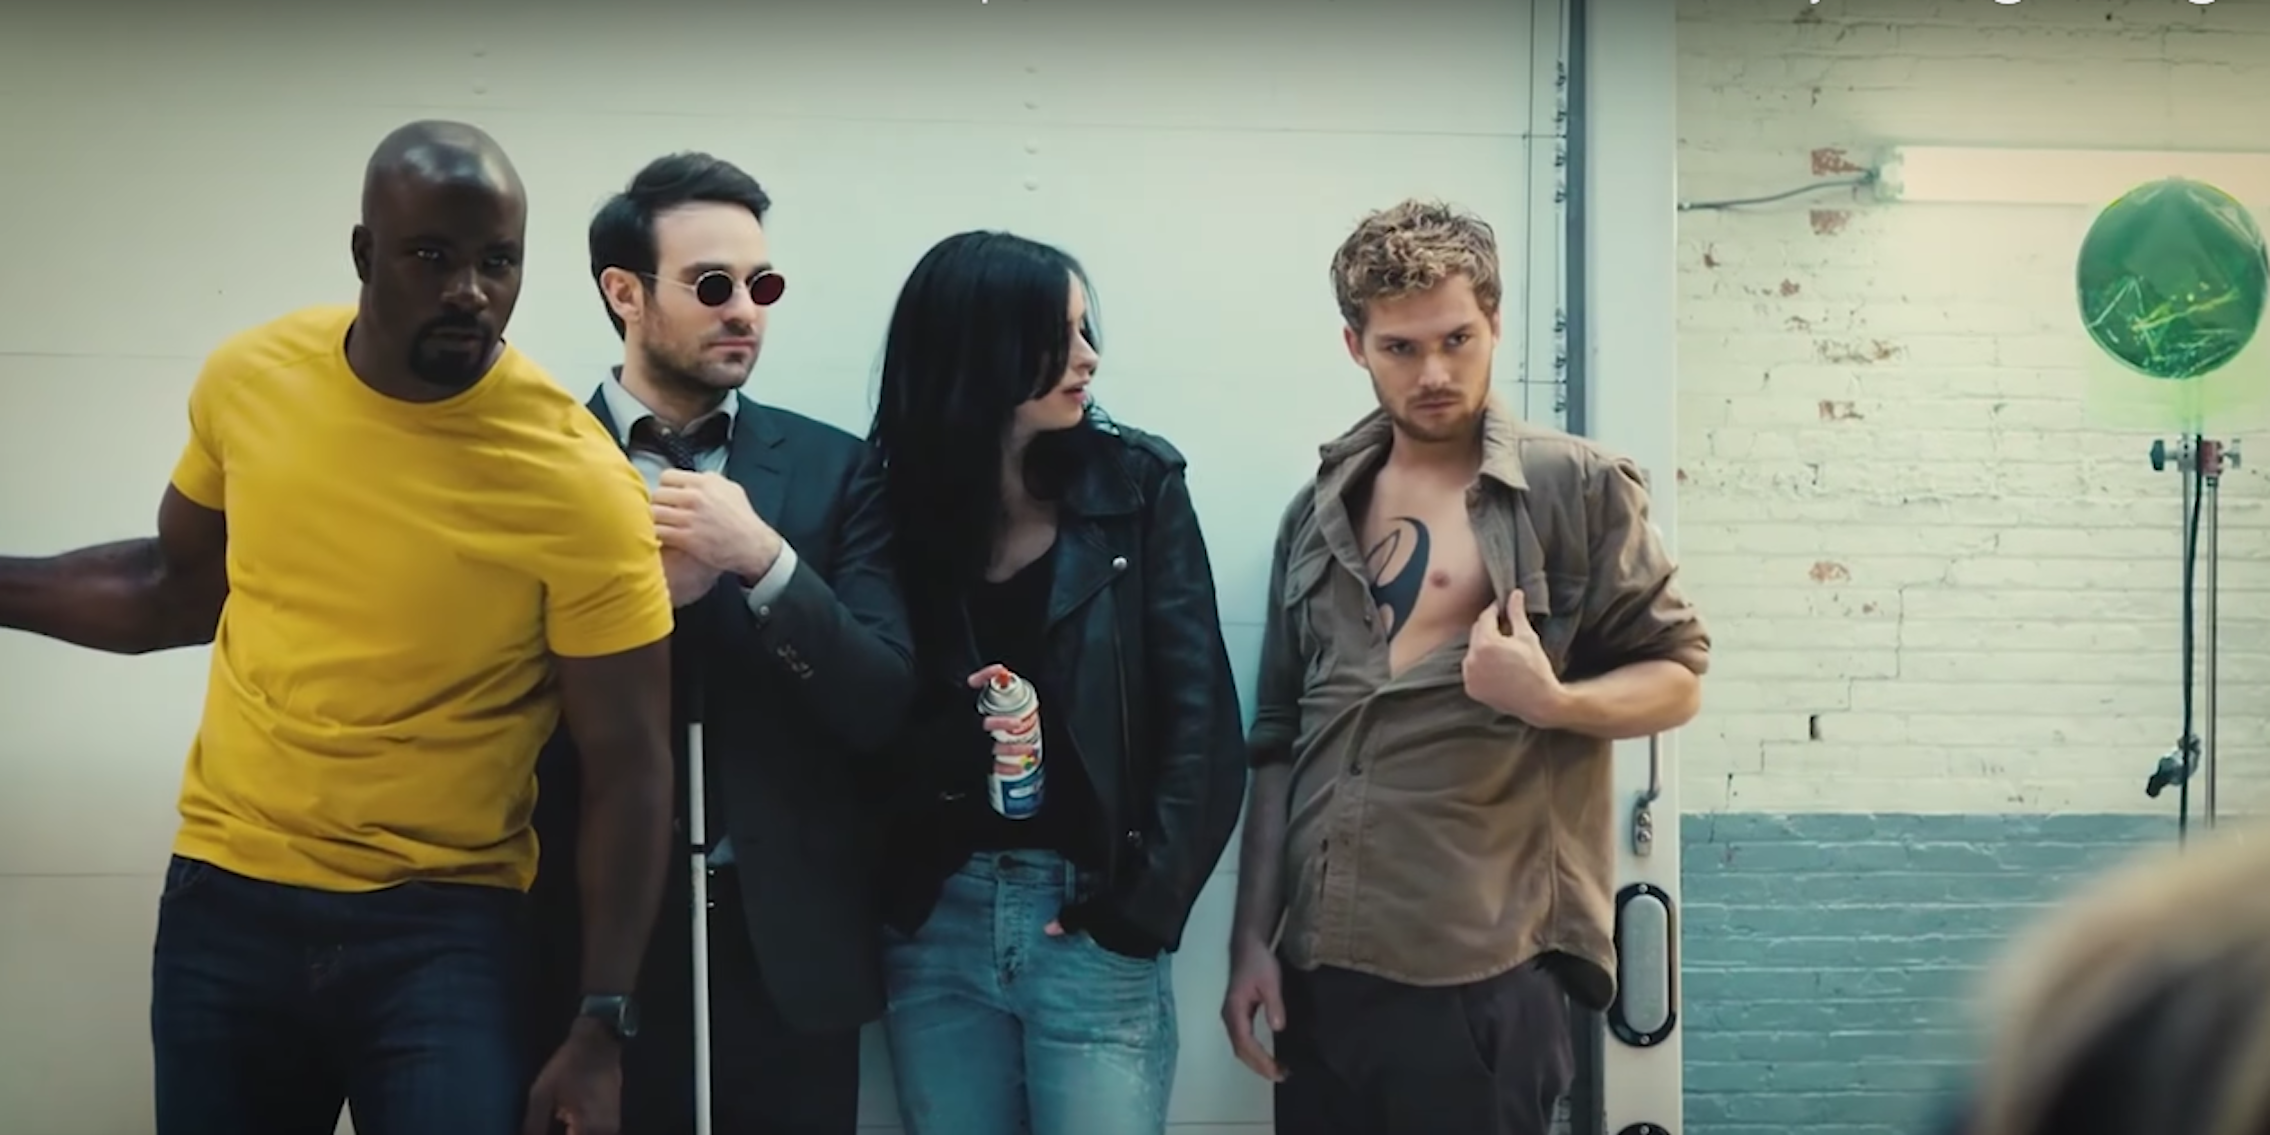 Netflix's The Defenders REVIEW - Iron Fist Is Still Not Good